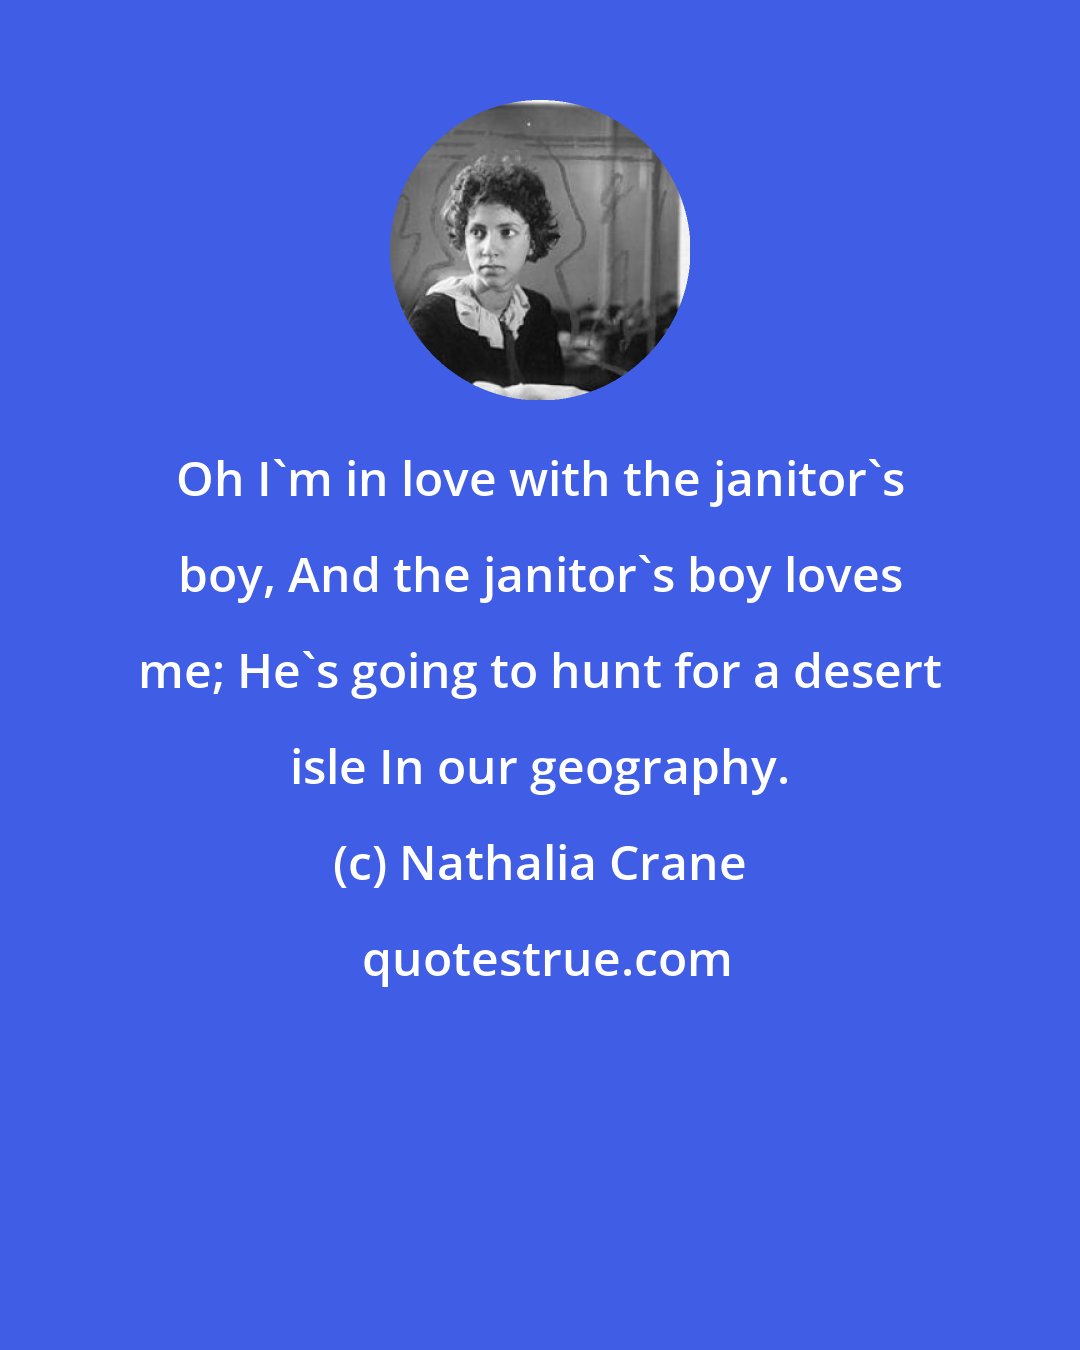 Nathalia Crane: Oh I'm in love with the janitor's boy, And the janitor's boy loves me; He's going to hunt for a desert isle In our geography.